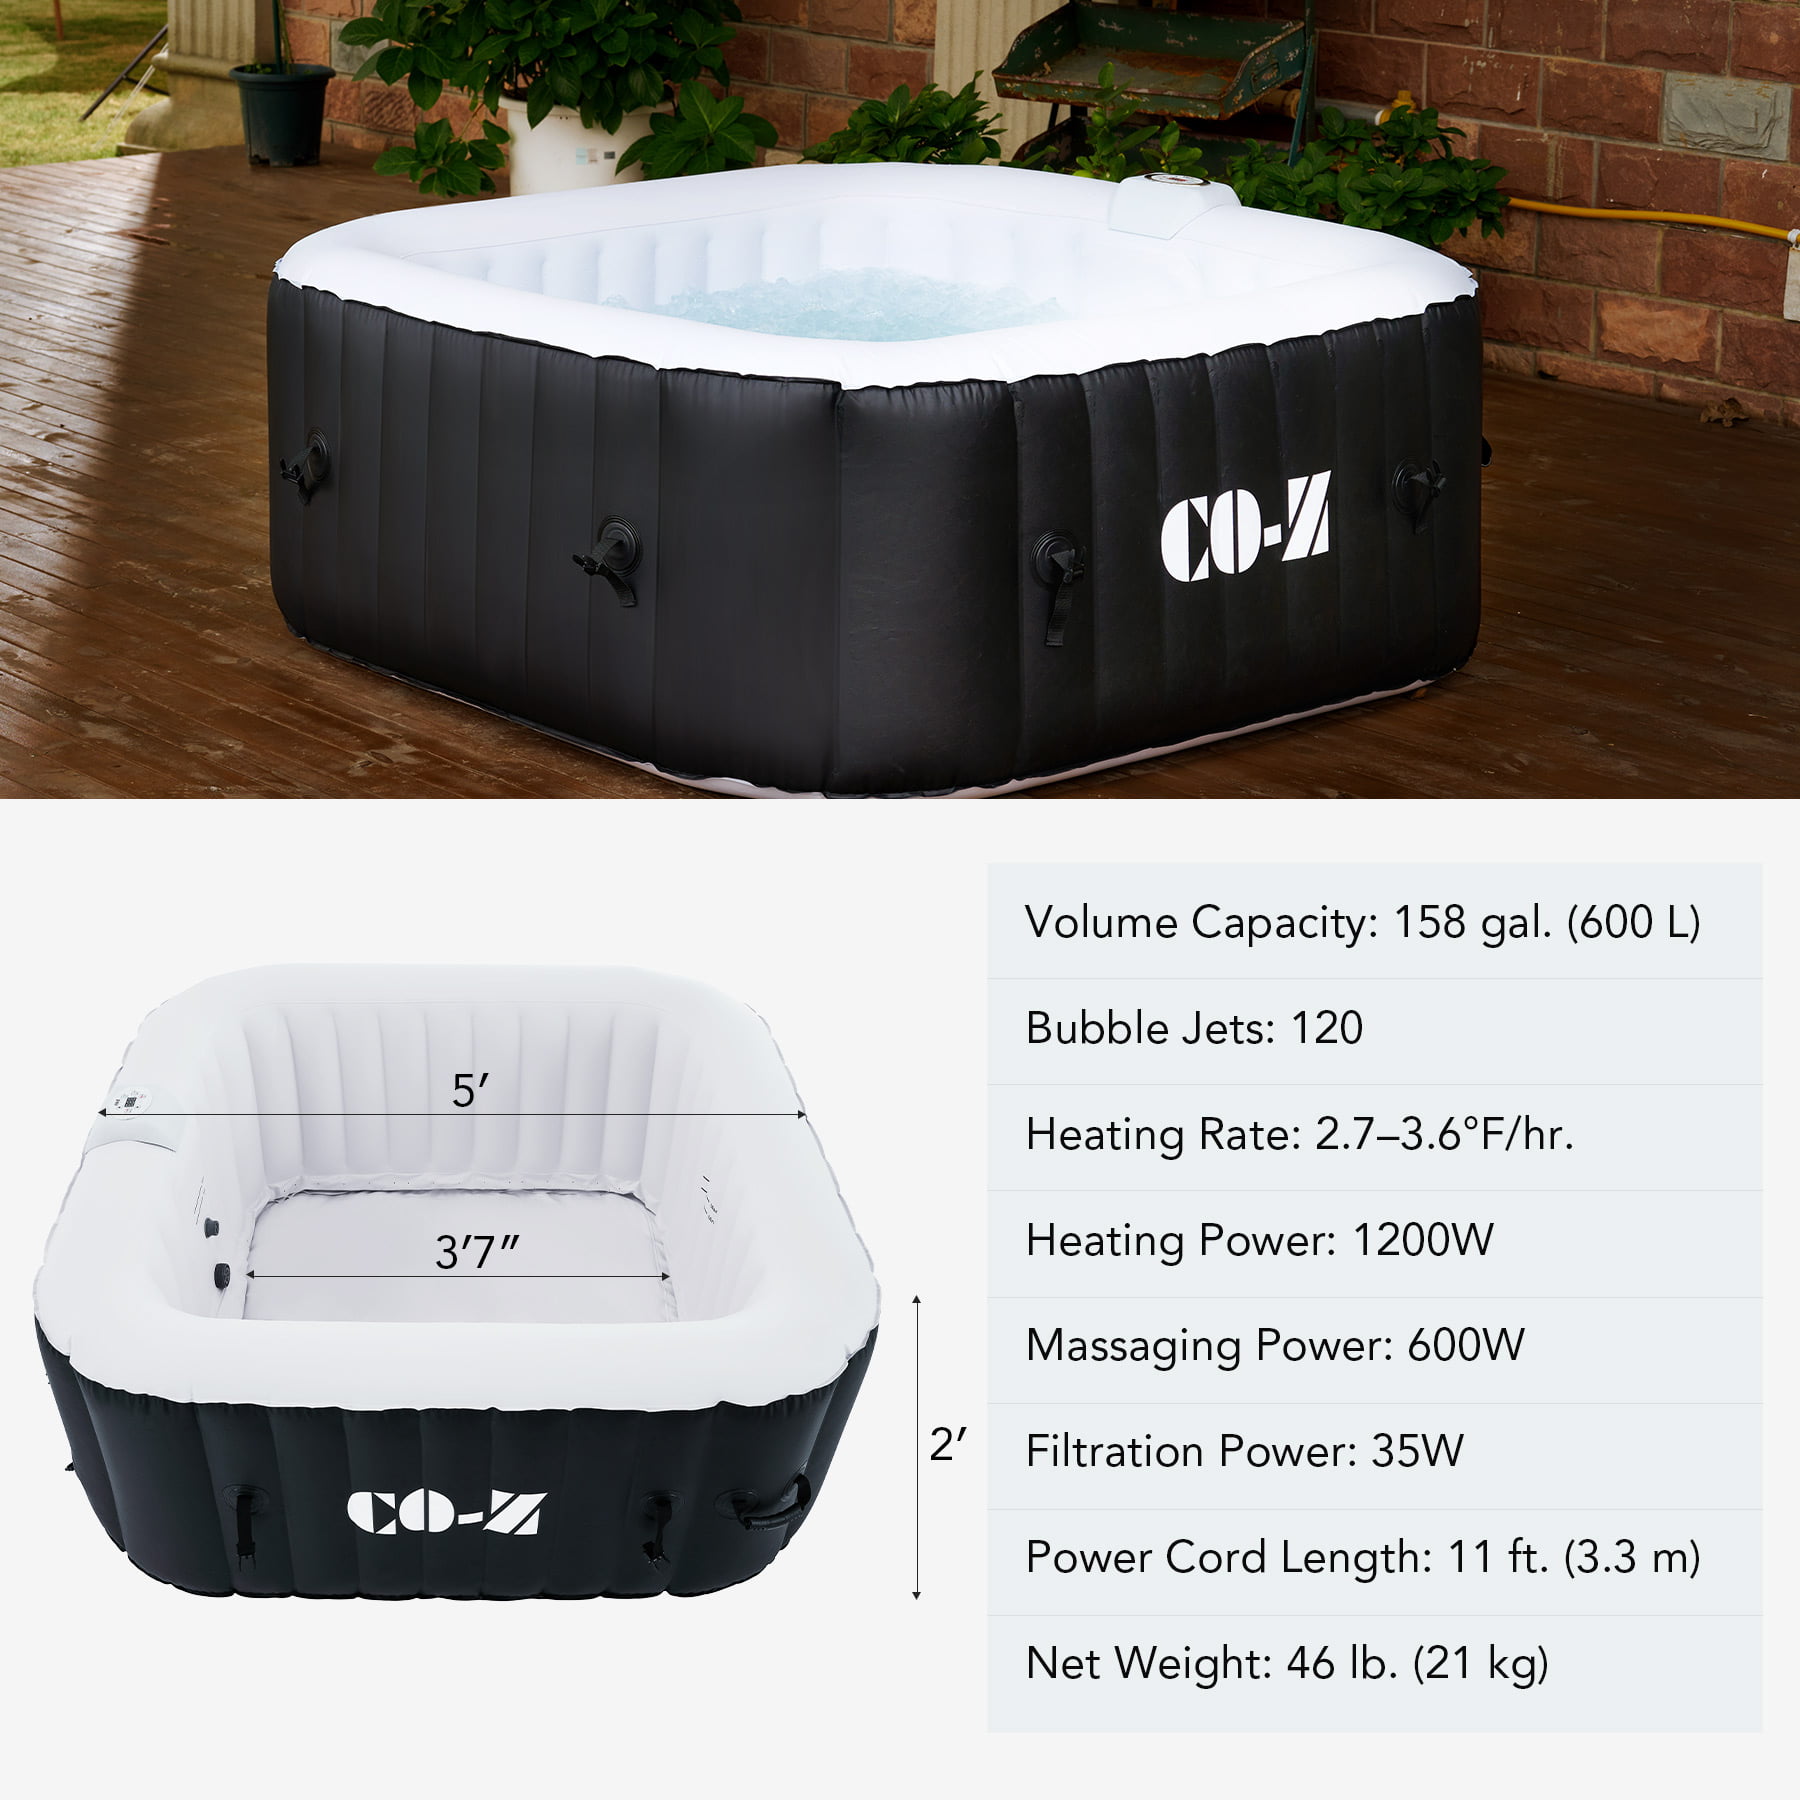 4 Person Blow Up Portable Hot Tub with 120 Bubble Jets Cover Black 5'x5' Outdoor Above Ground Pool and Bathtub with Electric Air Pump for Patio Backyard CO-Z Inflatable Hot Tub 